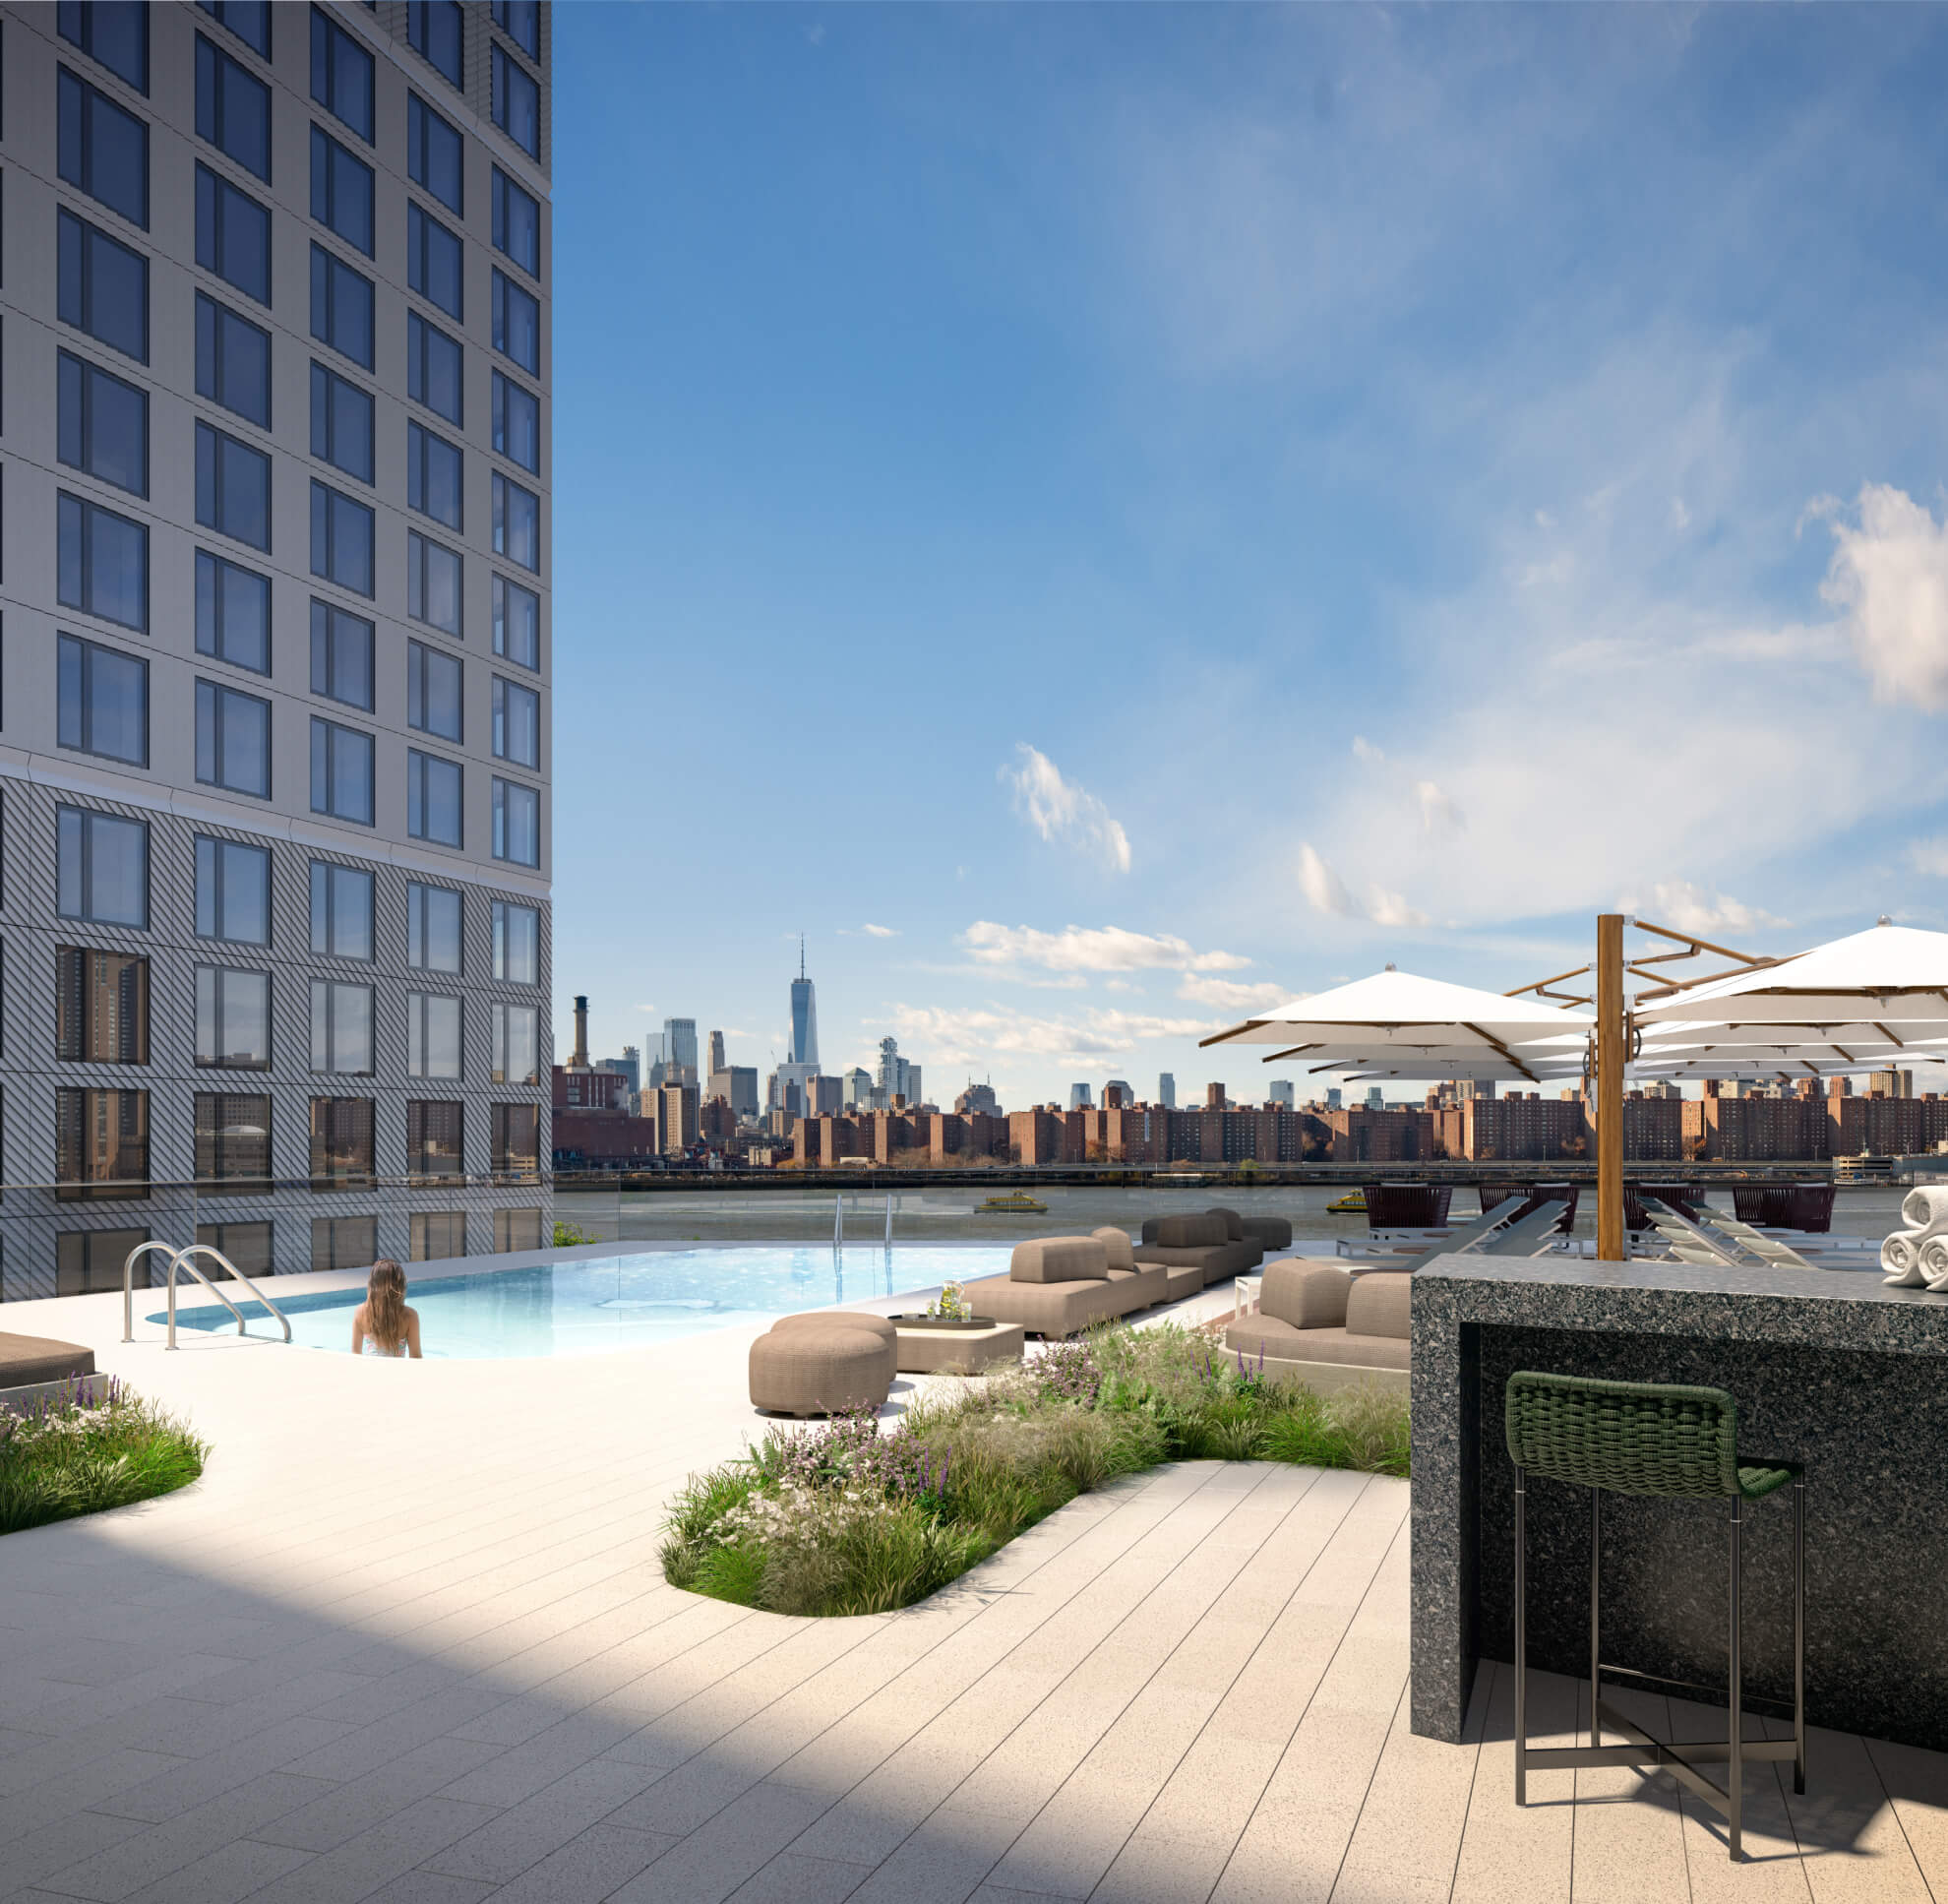 City-view rooftop pool, perfect for relaxation and enjoyment